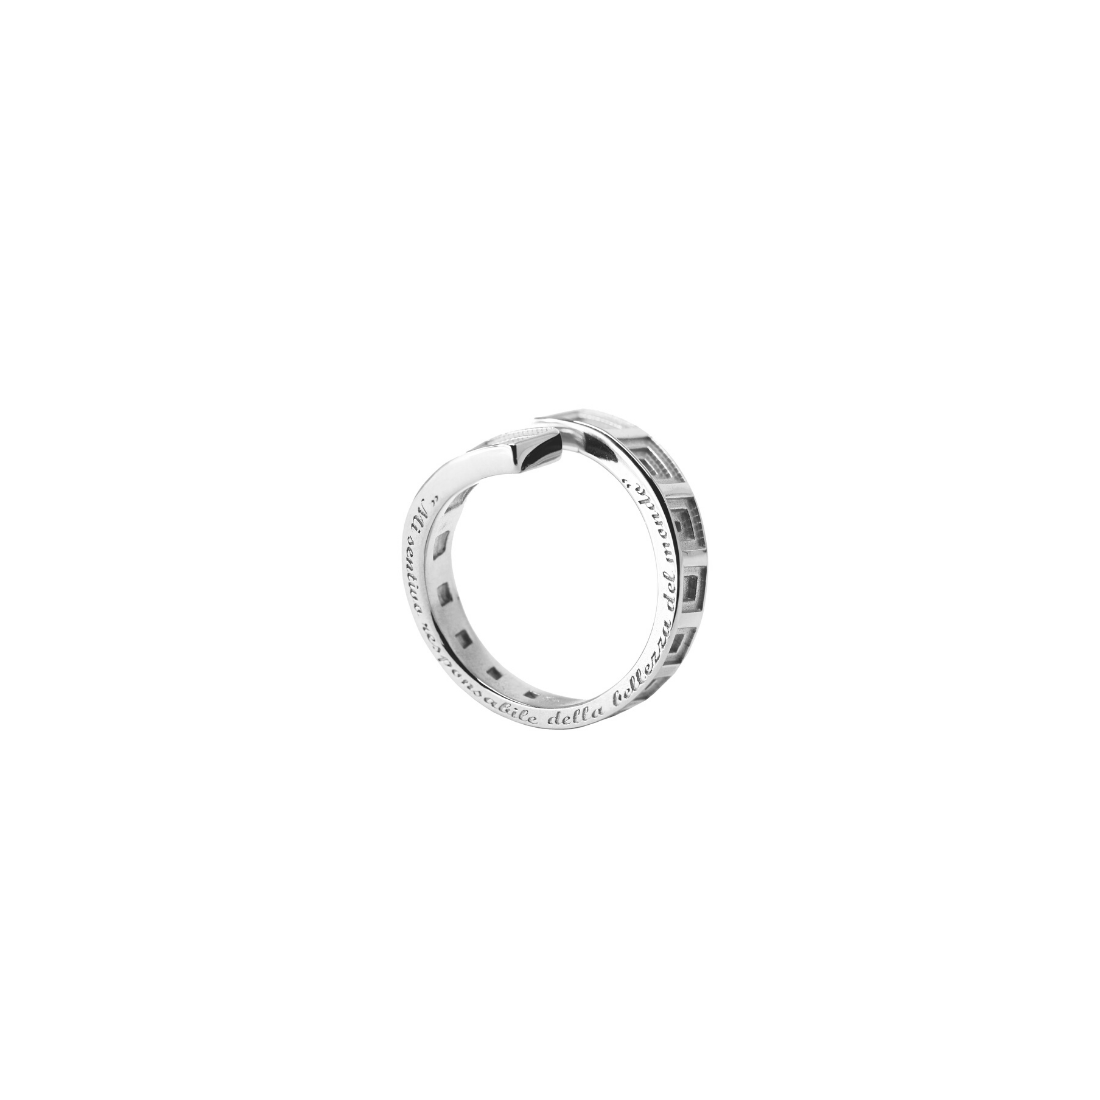 Pantheon Ring 925 Sterling Silver | Architecture-à-porter